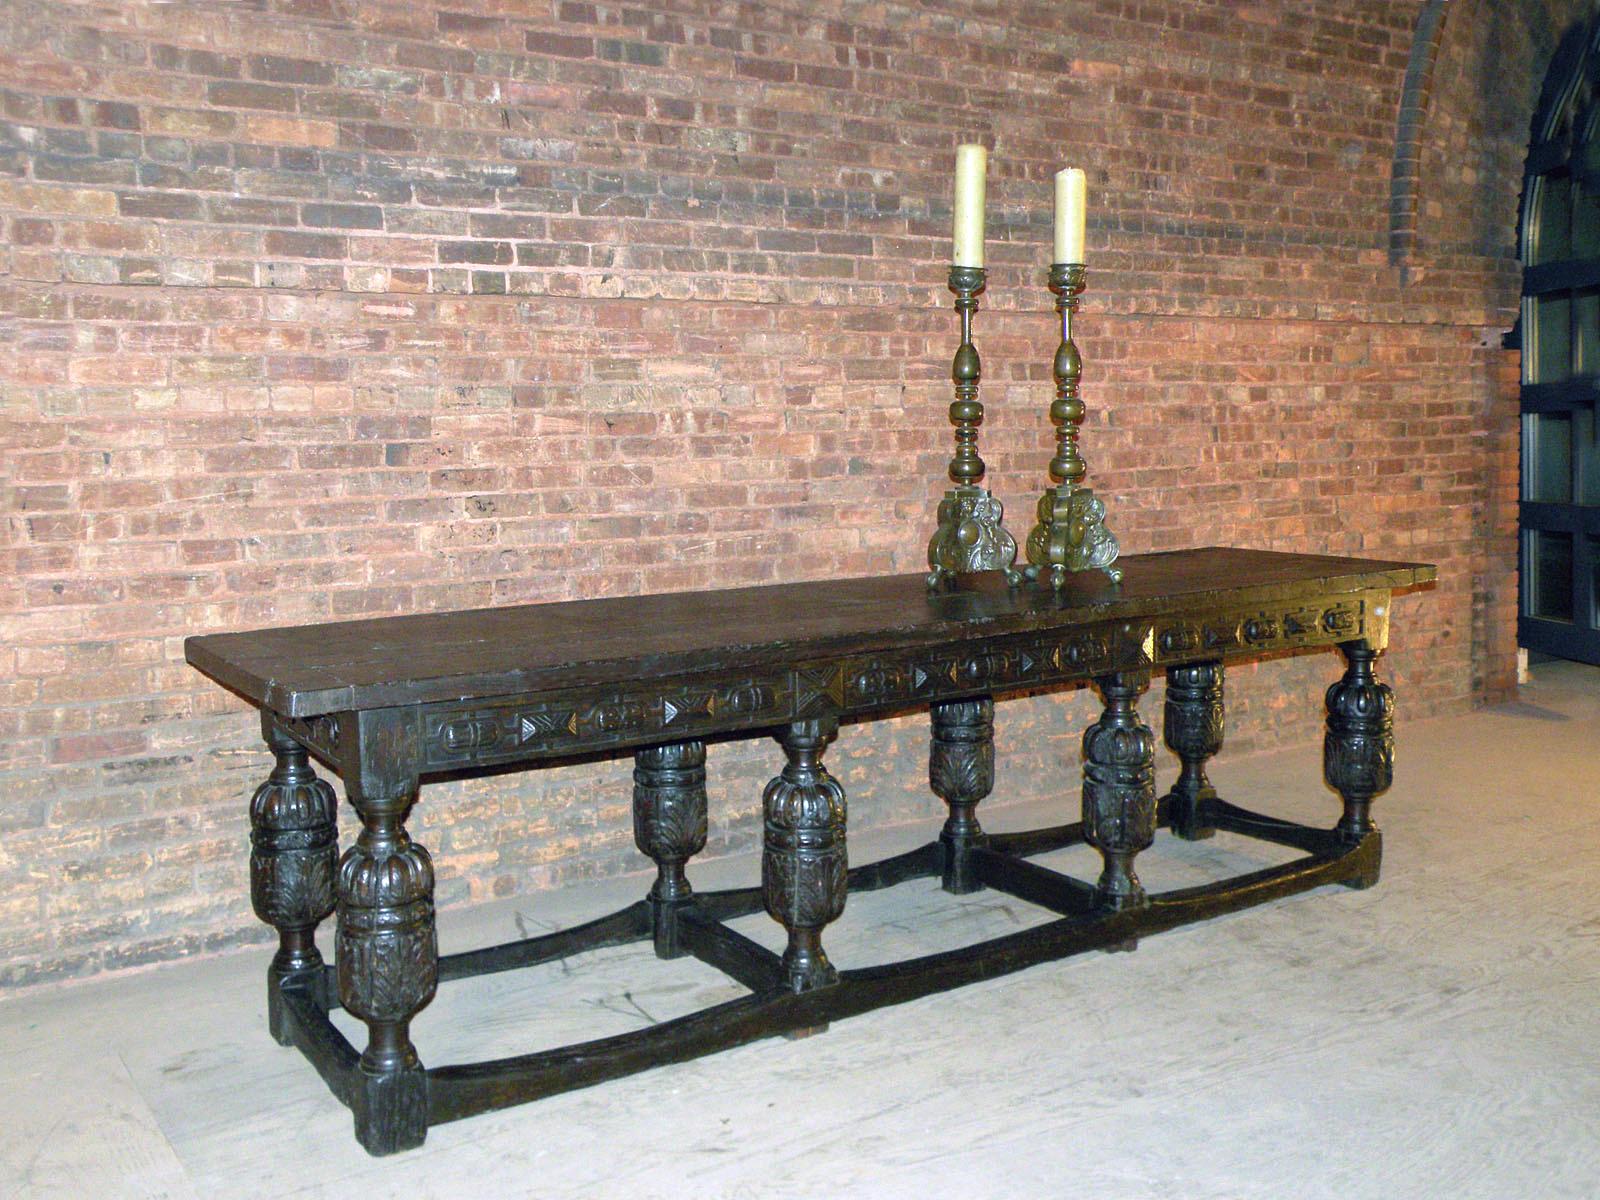 Spectacular long, rustic and very decorative Elizabethan Refectory table, well suited as console or library table or for casual dining. The rugged look with its worn down stretchers, the splits in the centuries old wood, the dark patina, beautifully